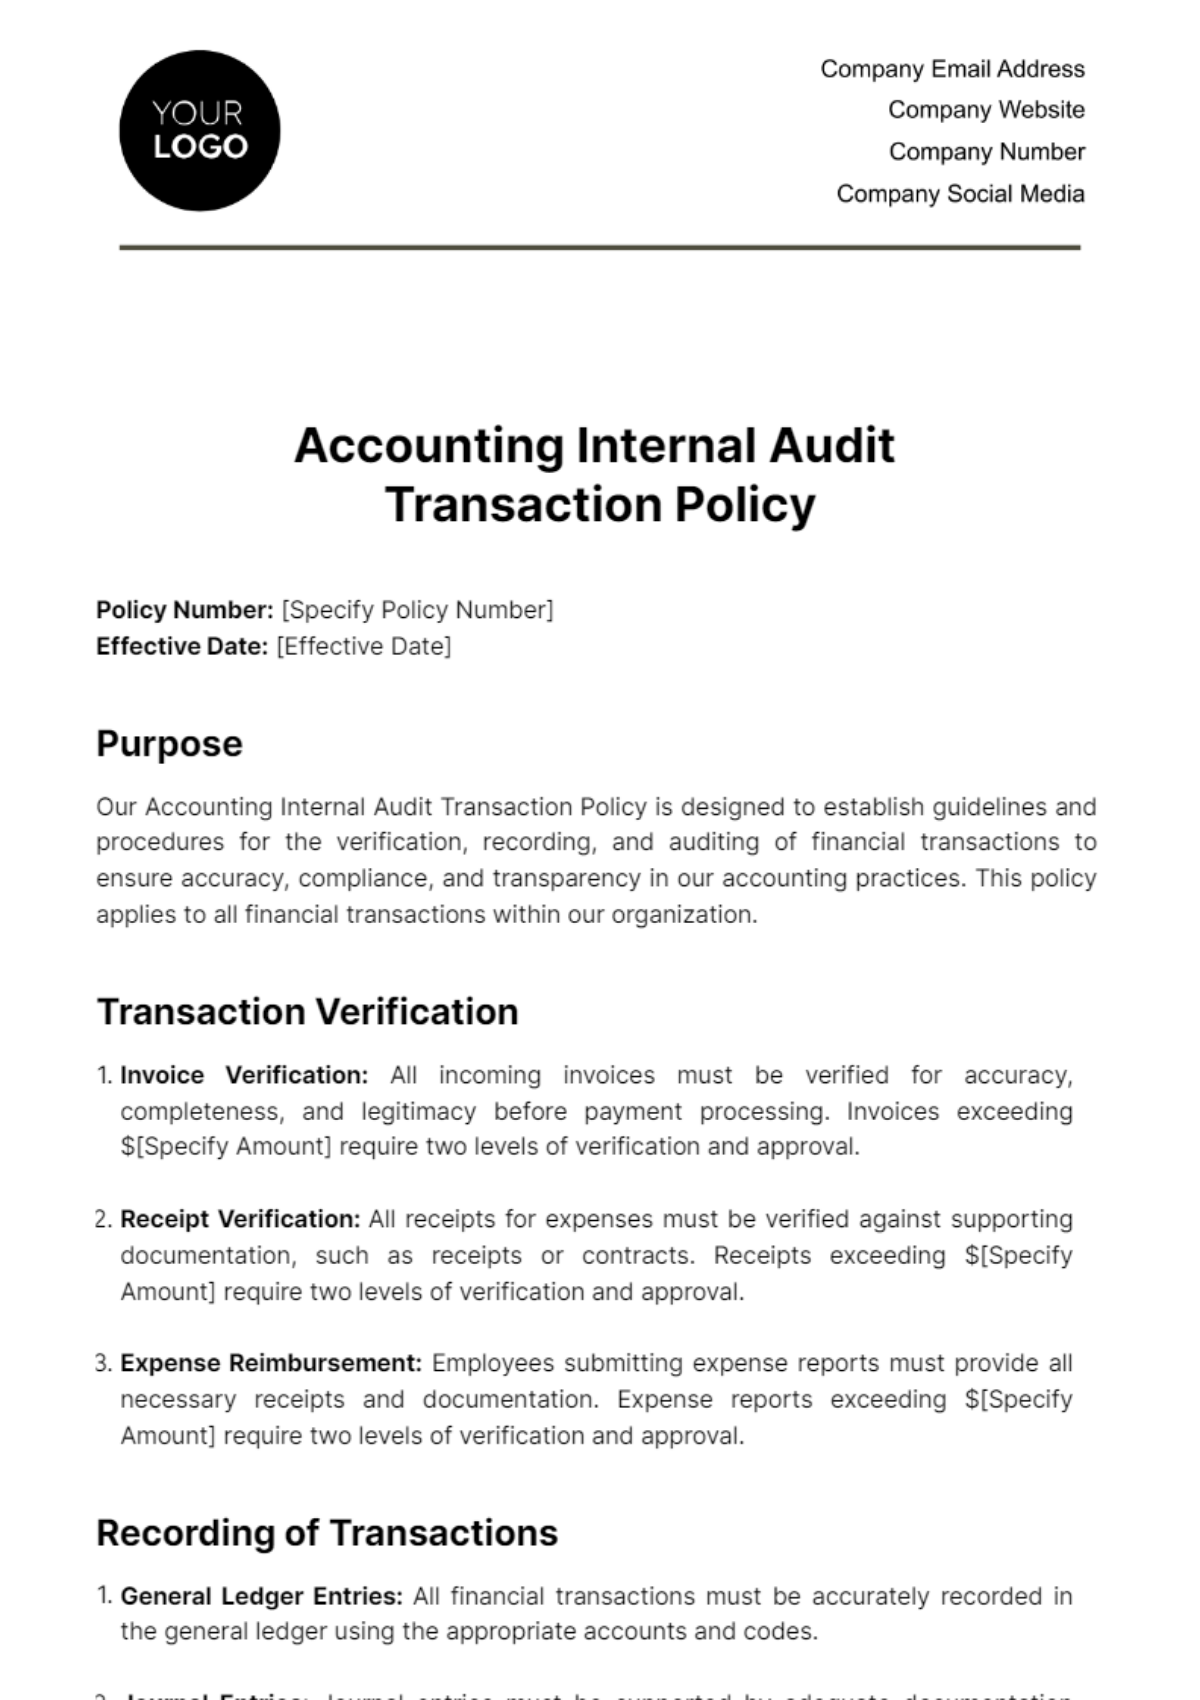 Accounting Internal Audit Transaction Policy Template